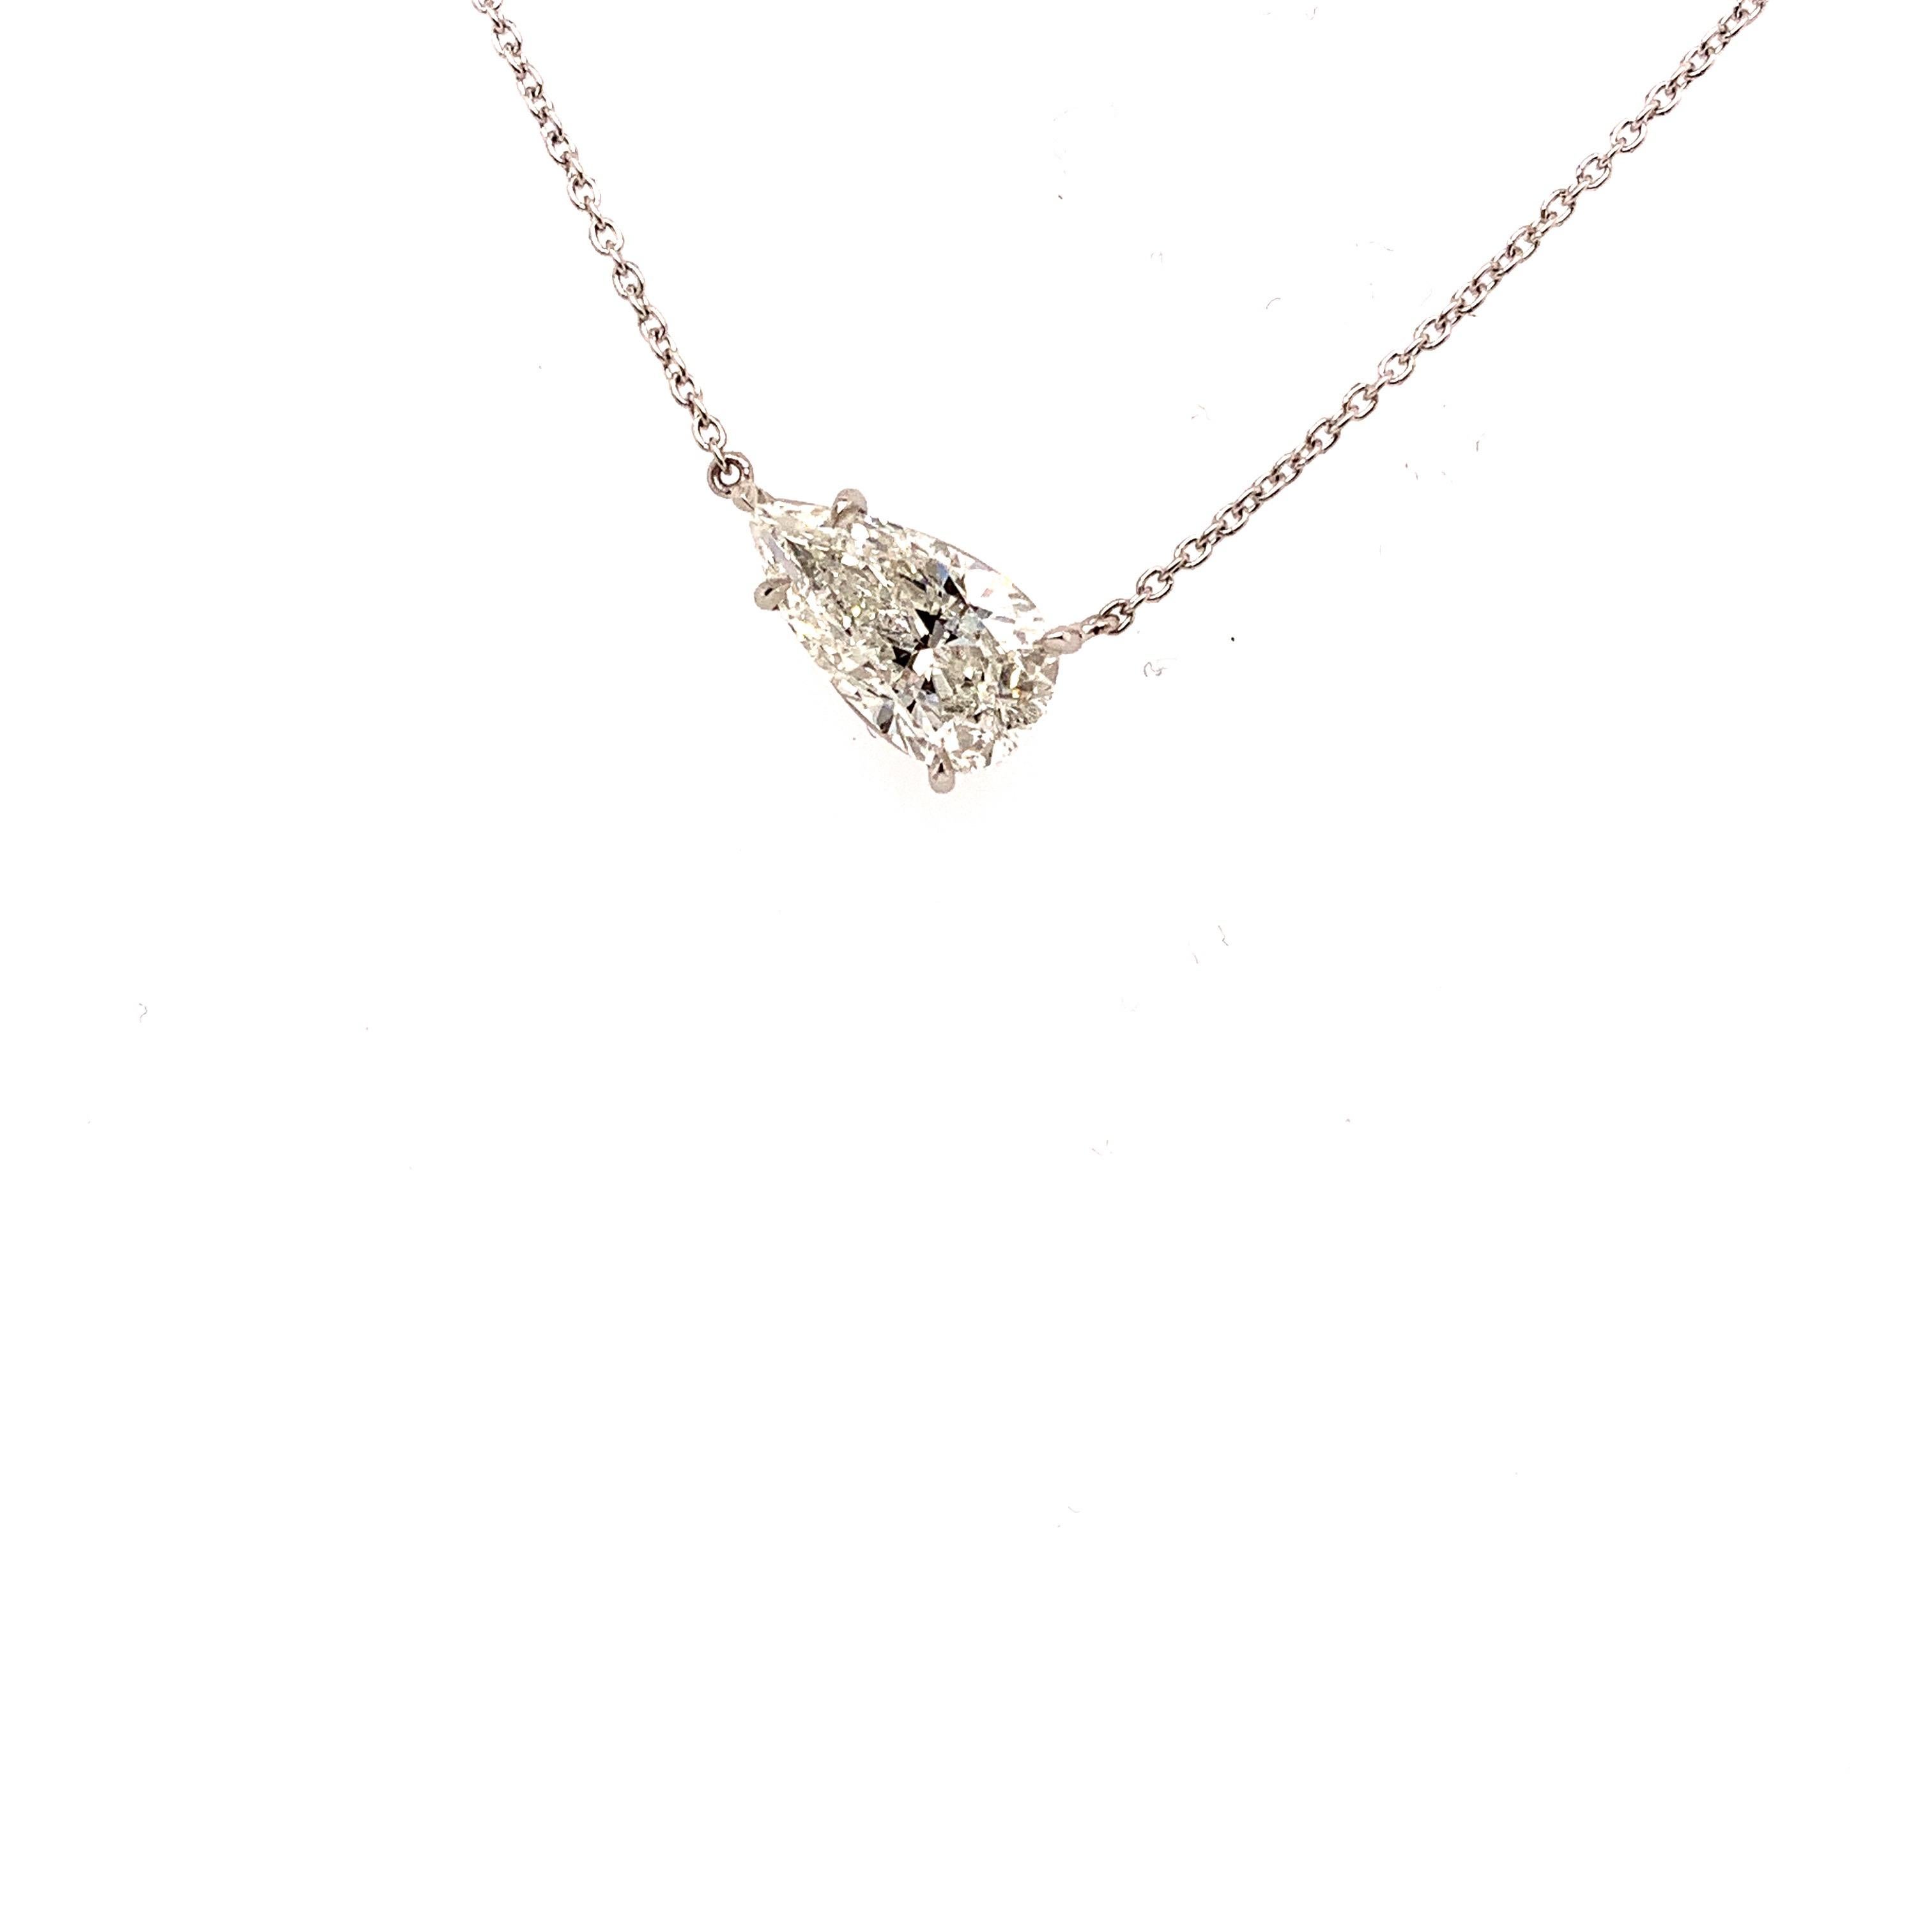 This stunning pendant necklace set in Italian hand made platinum. featuring a charming pear shape diamond, weighing 2.02 carats. Graded by the GIA I color SI2 clarity.
Newest look in pendants - the Diamond sits asymmetrical. 
The stone is set in a